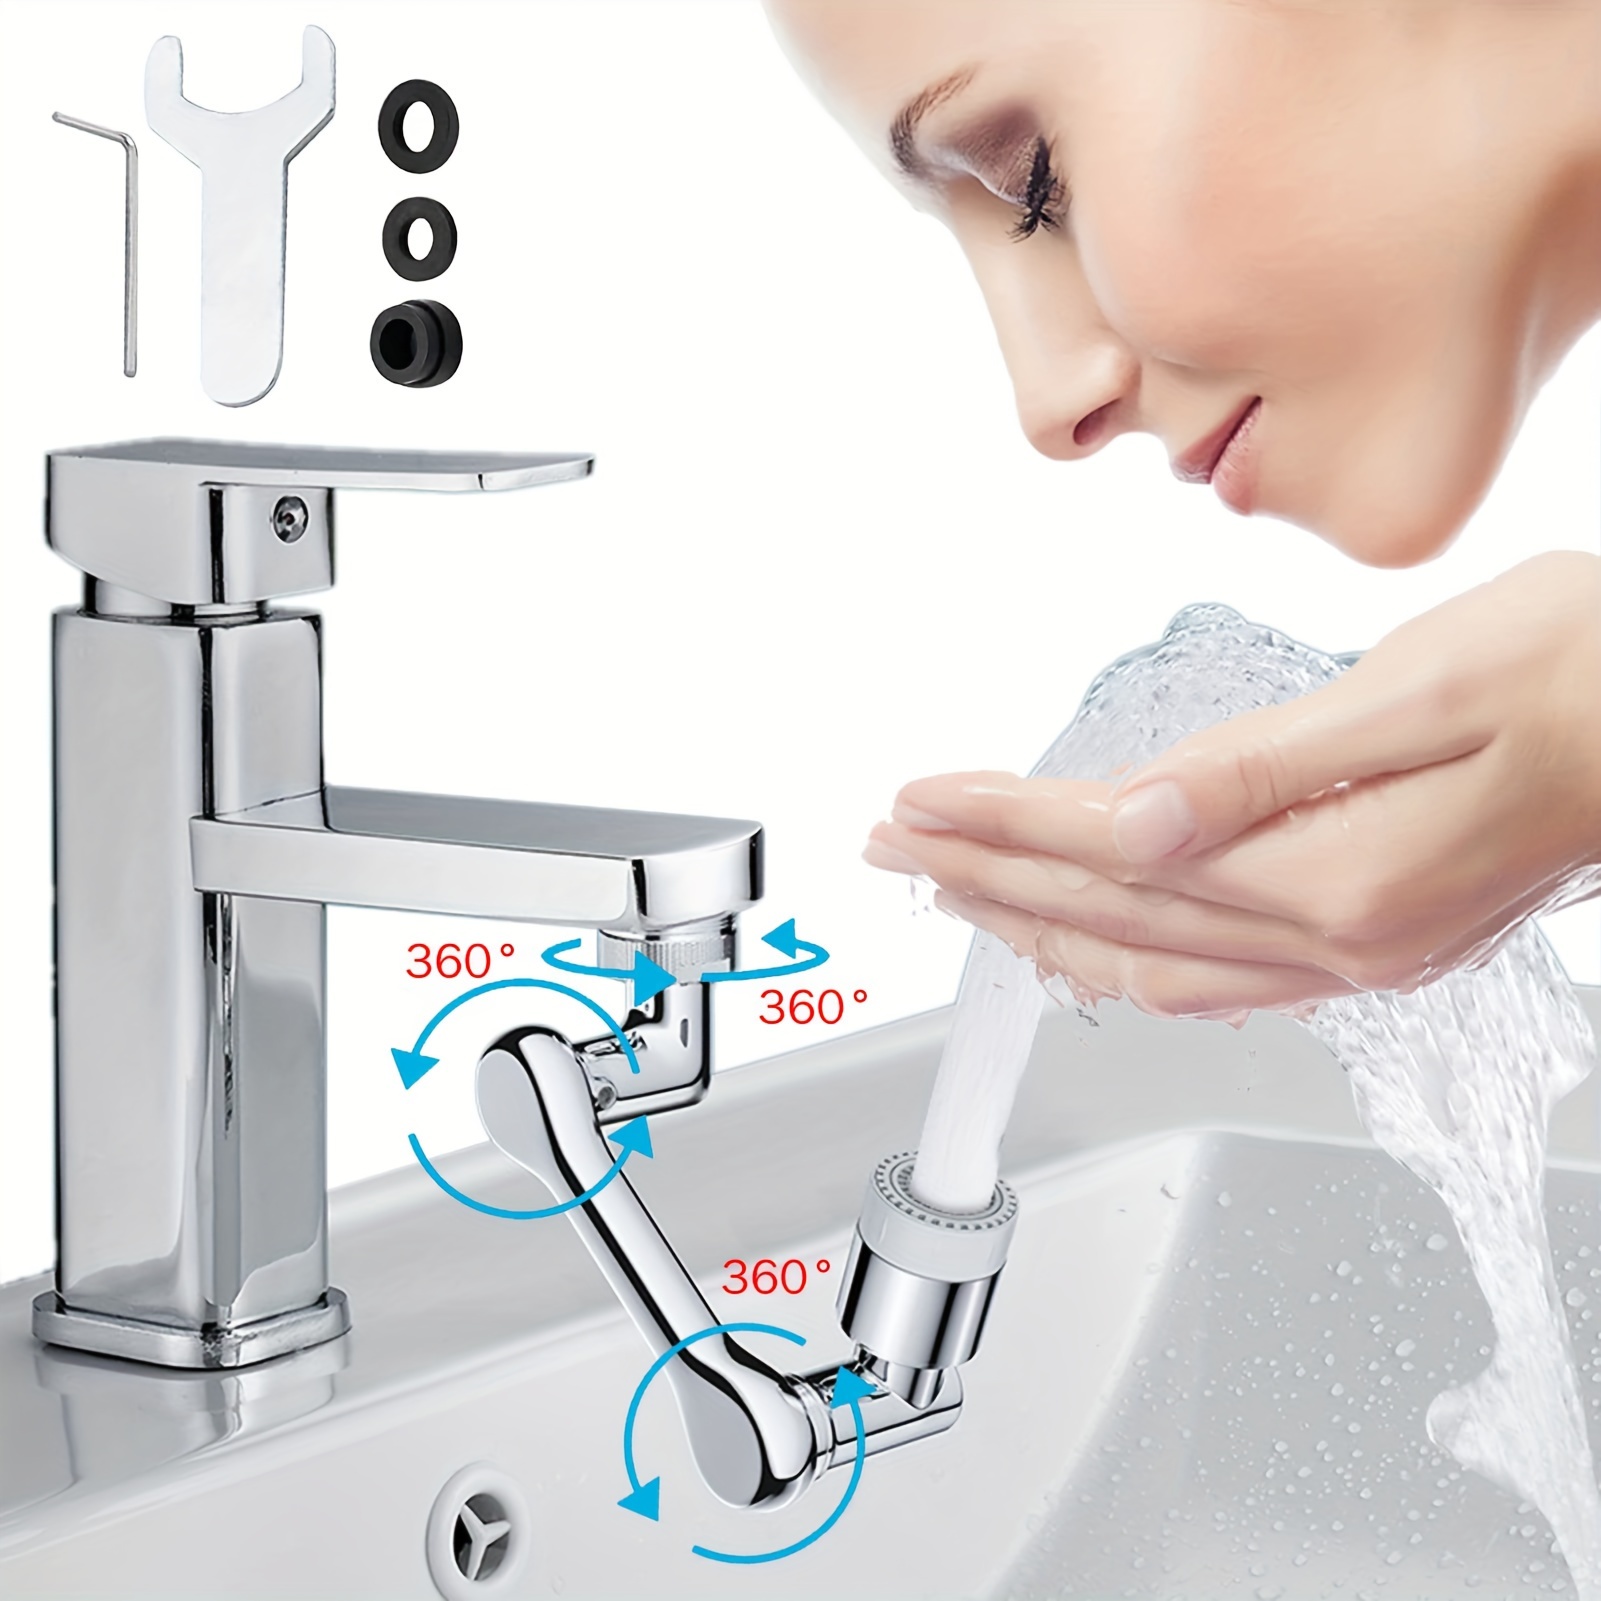 

1080° Rotating Faucet Extender Rotatable Multifunctional Extension Faucet Universal Splash Filter Faucet Swivel Faucet Aerator Sink Face Wash Attachment With 2 Water Outlet Modes